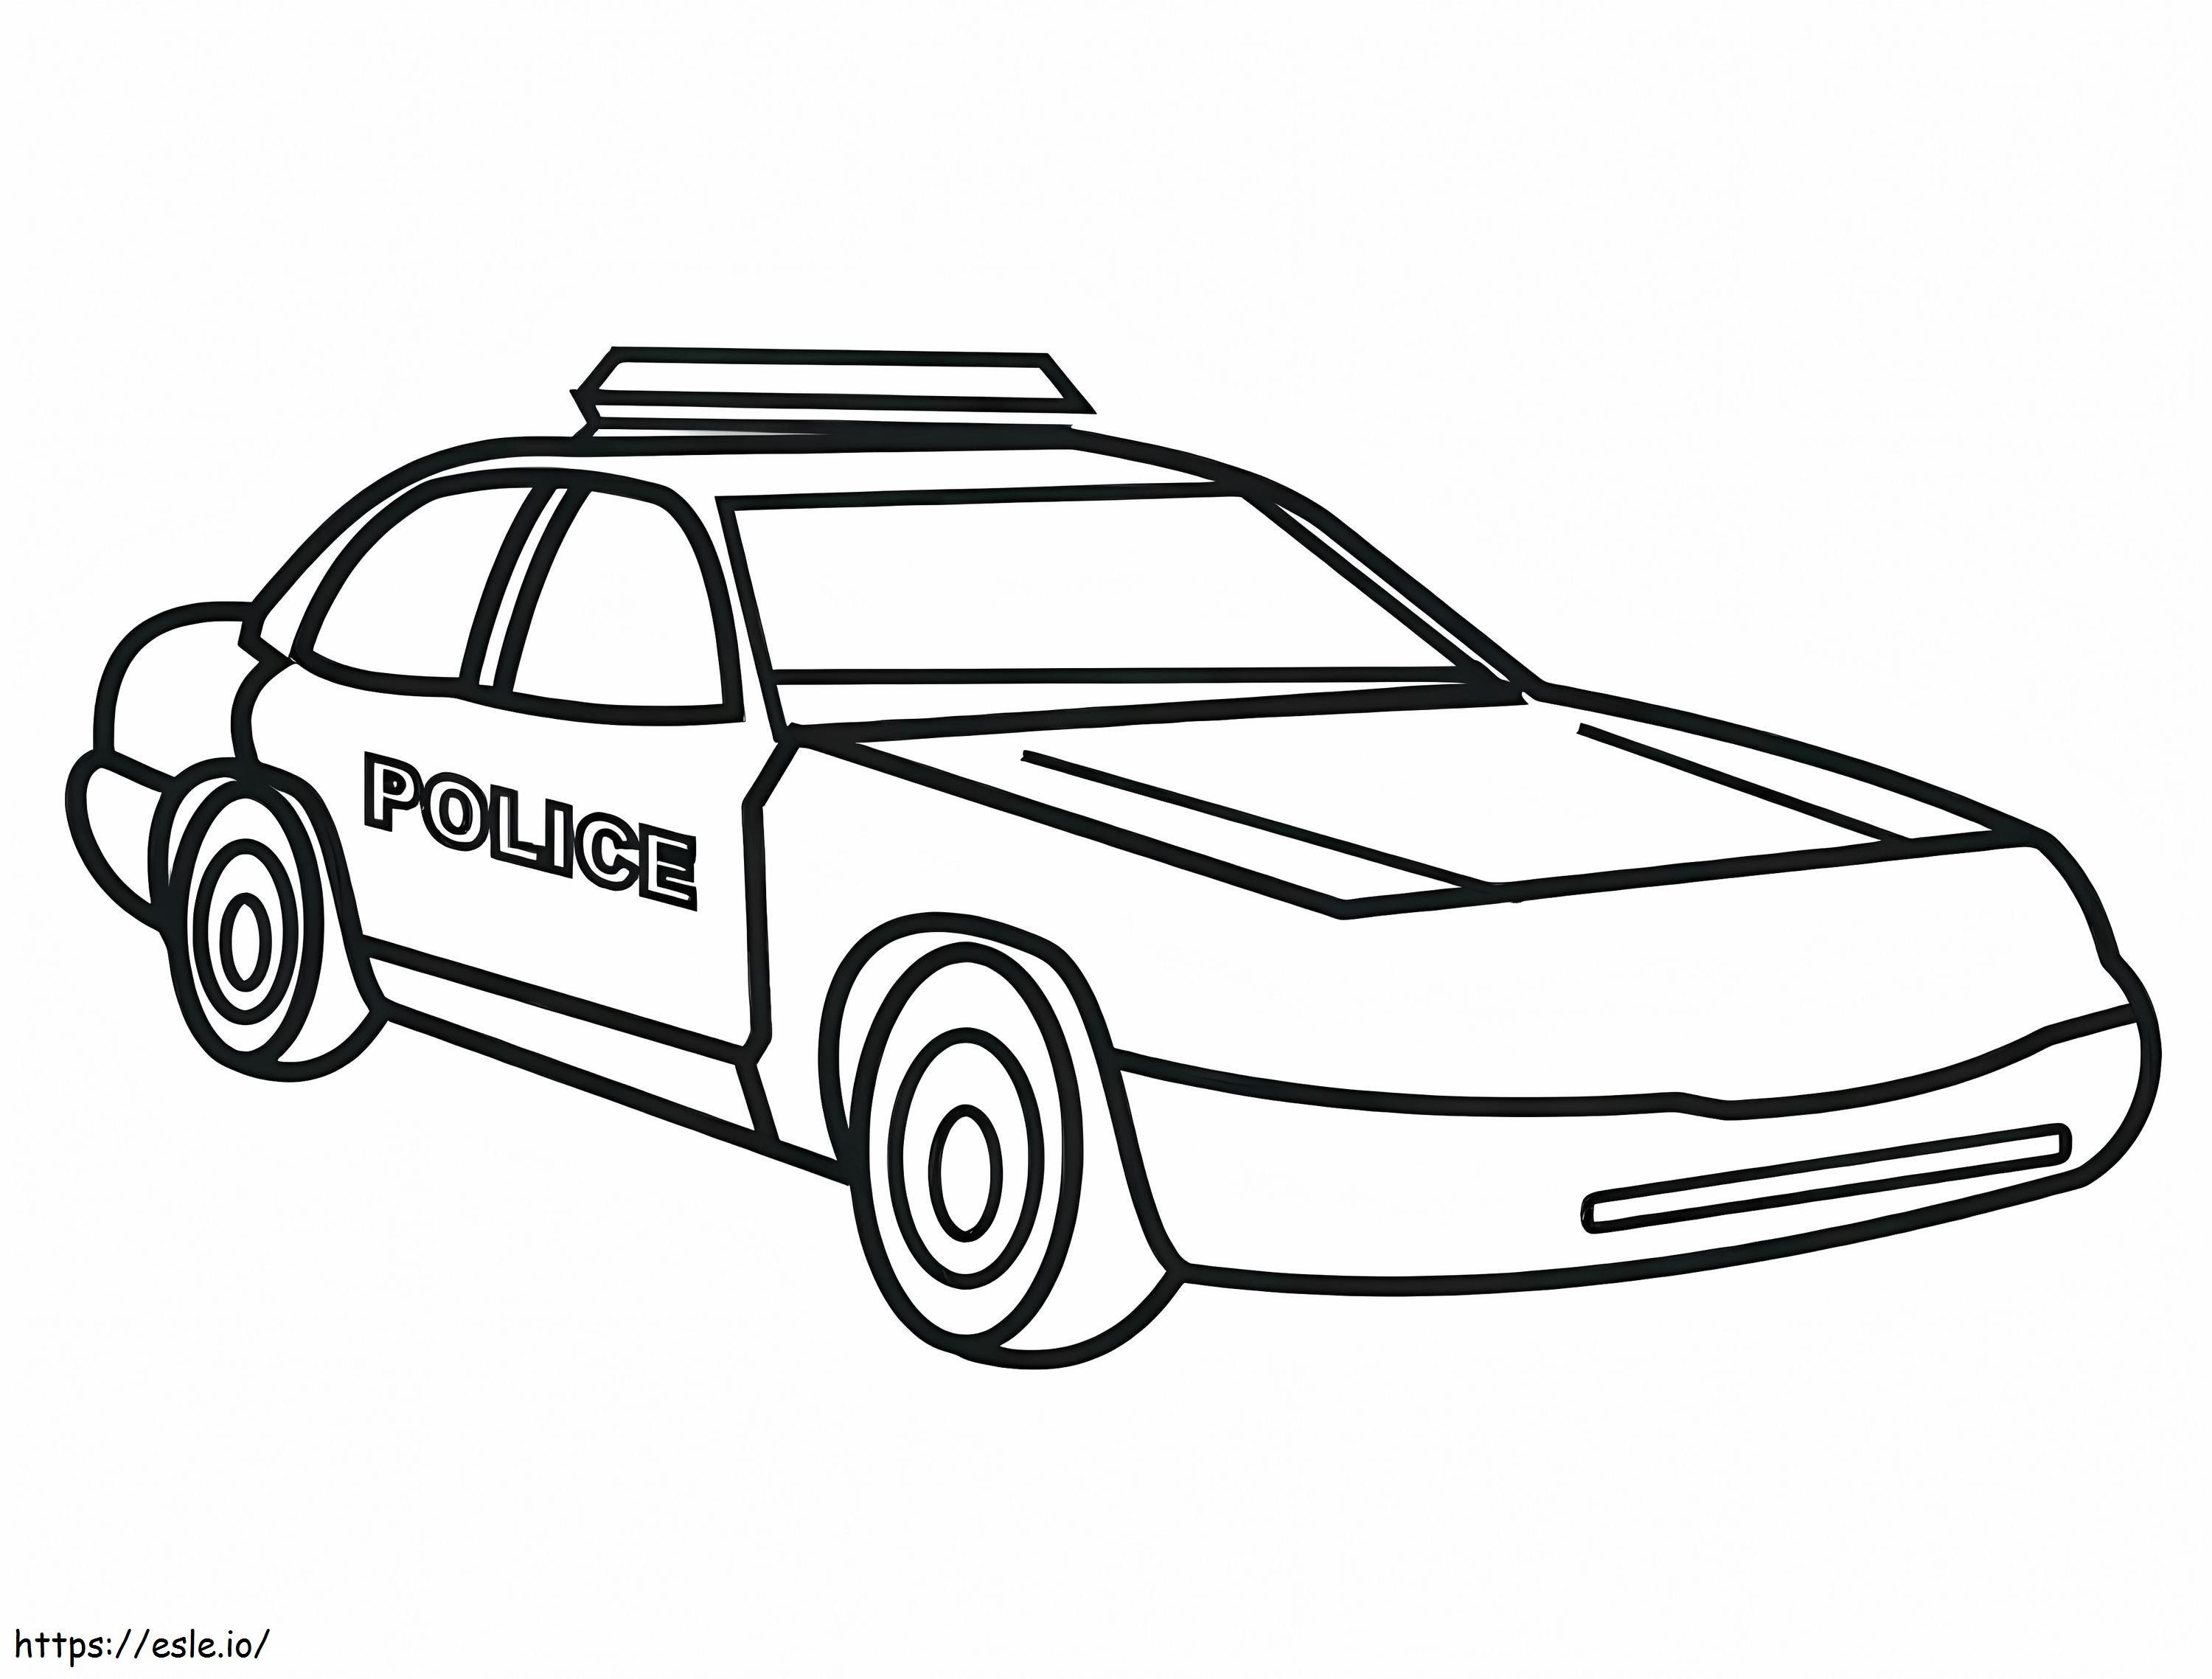 Police Car 7 coloring page